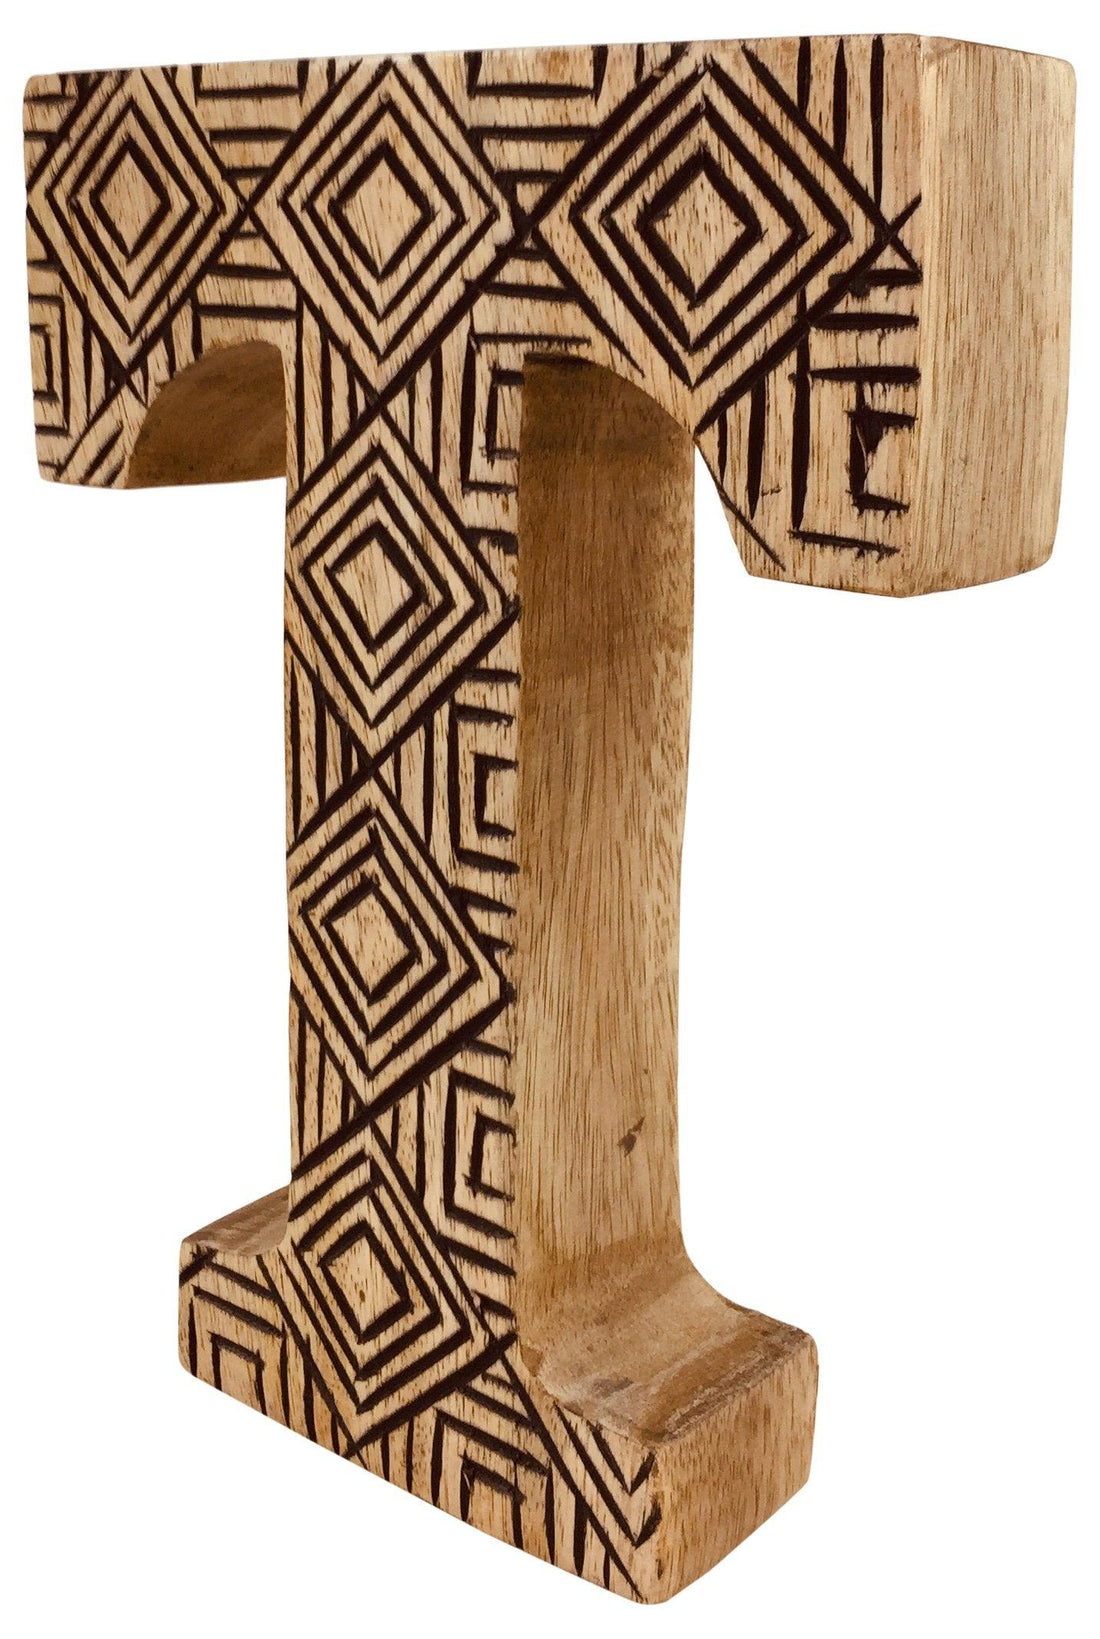 Hand Carved Wooden Geometric Letter T - £12.99 - Single Letters 